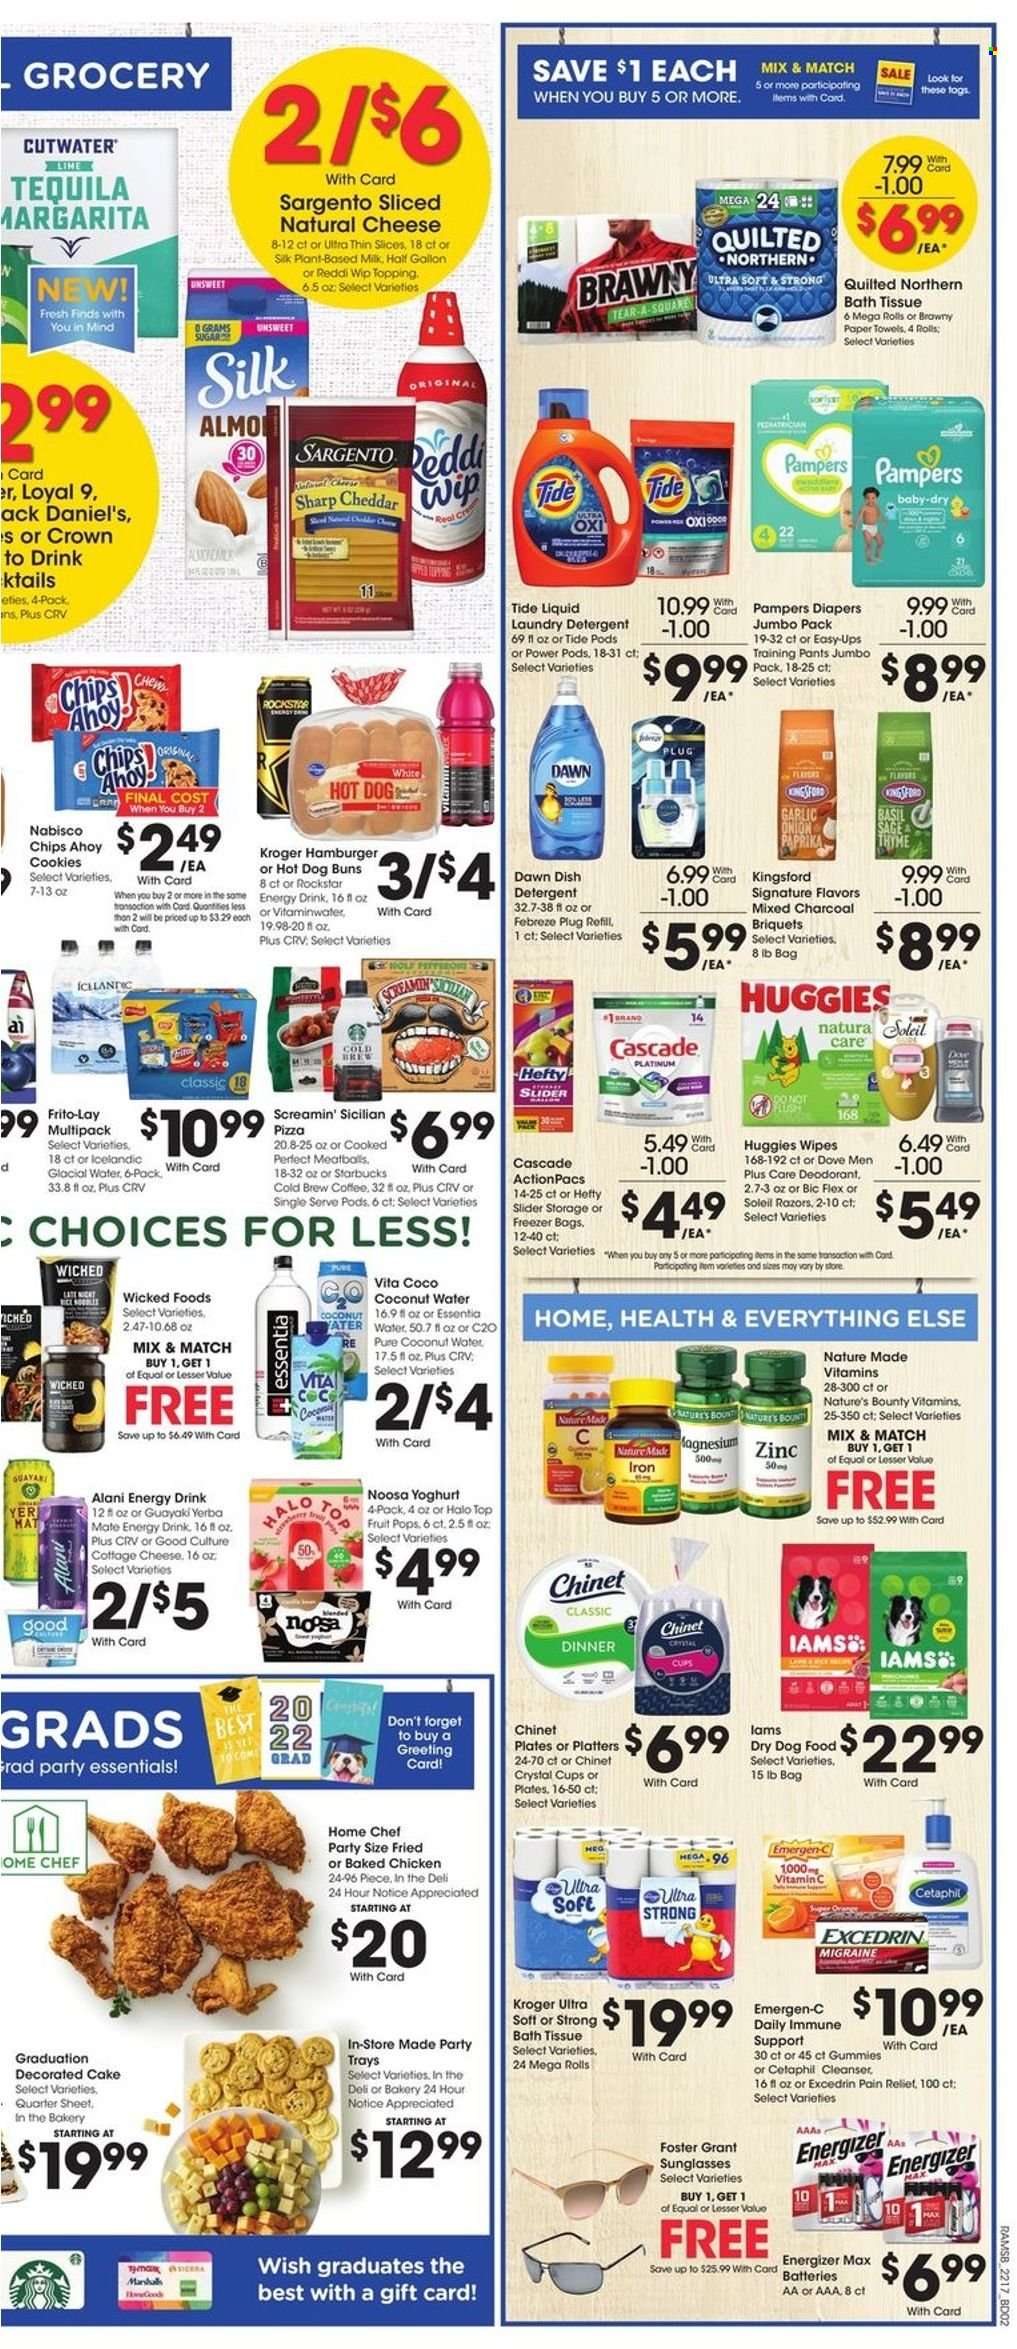 thumbnail - Ralphs Flyer - 05/25/2022 - 05/31/2022 - Sales products - cake, buns, garlic, pizza, meatballs, cottage cheese, Sargento, yoghurt, milk, Silk, Screamin' Sicilian, cookies, chips, sugar, topping, esponja, energy drink, coconut water, Rockstar, coffee, Starbucks, tequila, wipes, Huggies, Pampers, pants, nappies, baby pants, bath tissue, Quilted Northern, kitchen towels, paper towels, detergent, Febreze, Cascade, Tide, laundry detergent, Dove, cleanser, anti-perspirant, deodorant, BIC, Hefty, freezer bag, battery, Energizer, animal food, dry dog food, dog food, Iams, sunglasses, briquettes, Kingsford, Excedrin, magnesium, Nature Made, Nature's Bounty, vitamin c, zinc, Emergen-C. Page 6.